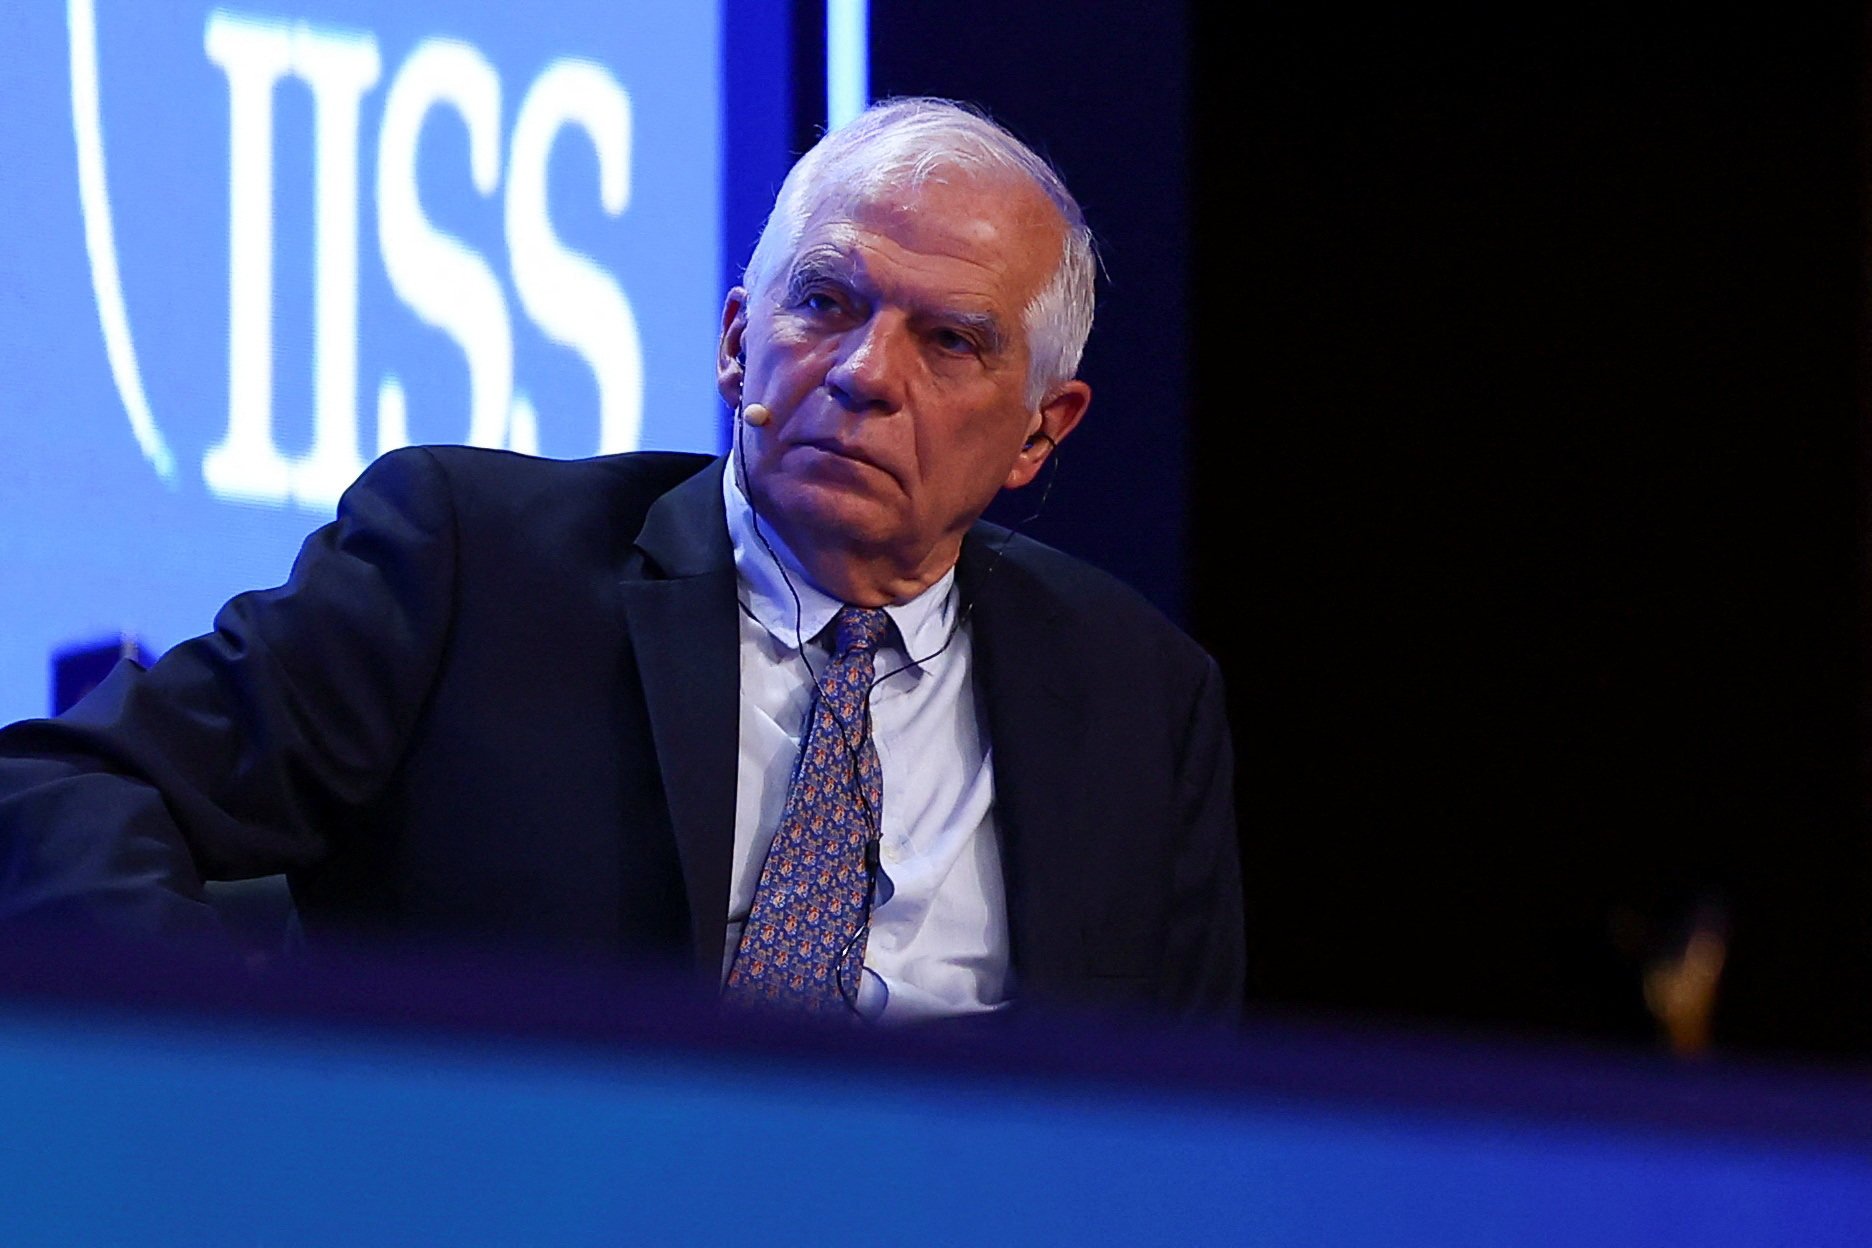 EU foreign policy chief Josep Borrell was speaking at the Shangri-La Dialogue in Singapore. Photo: Reuters